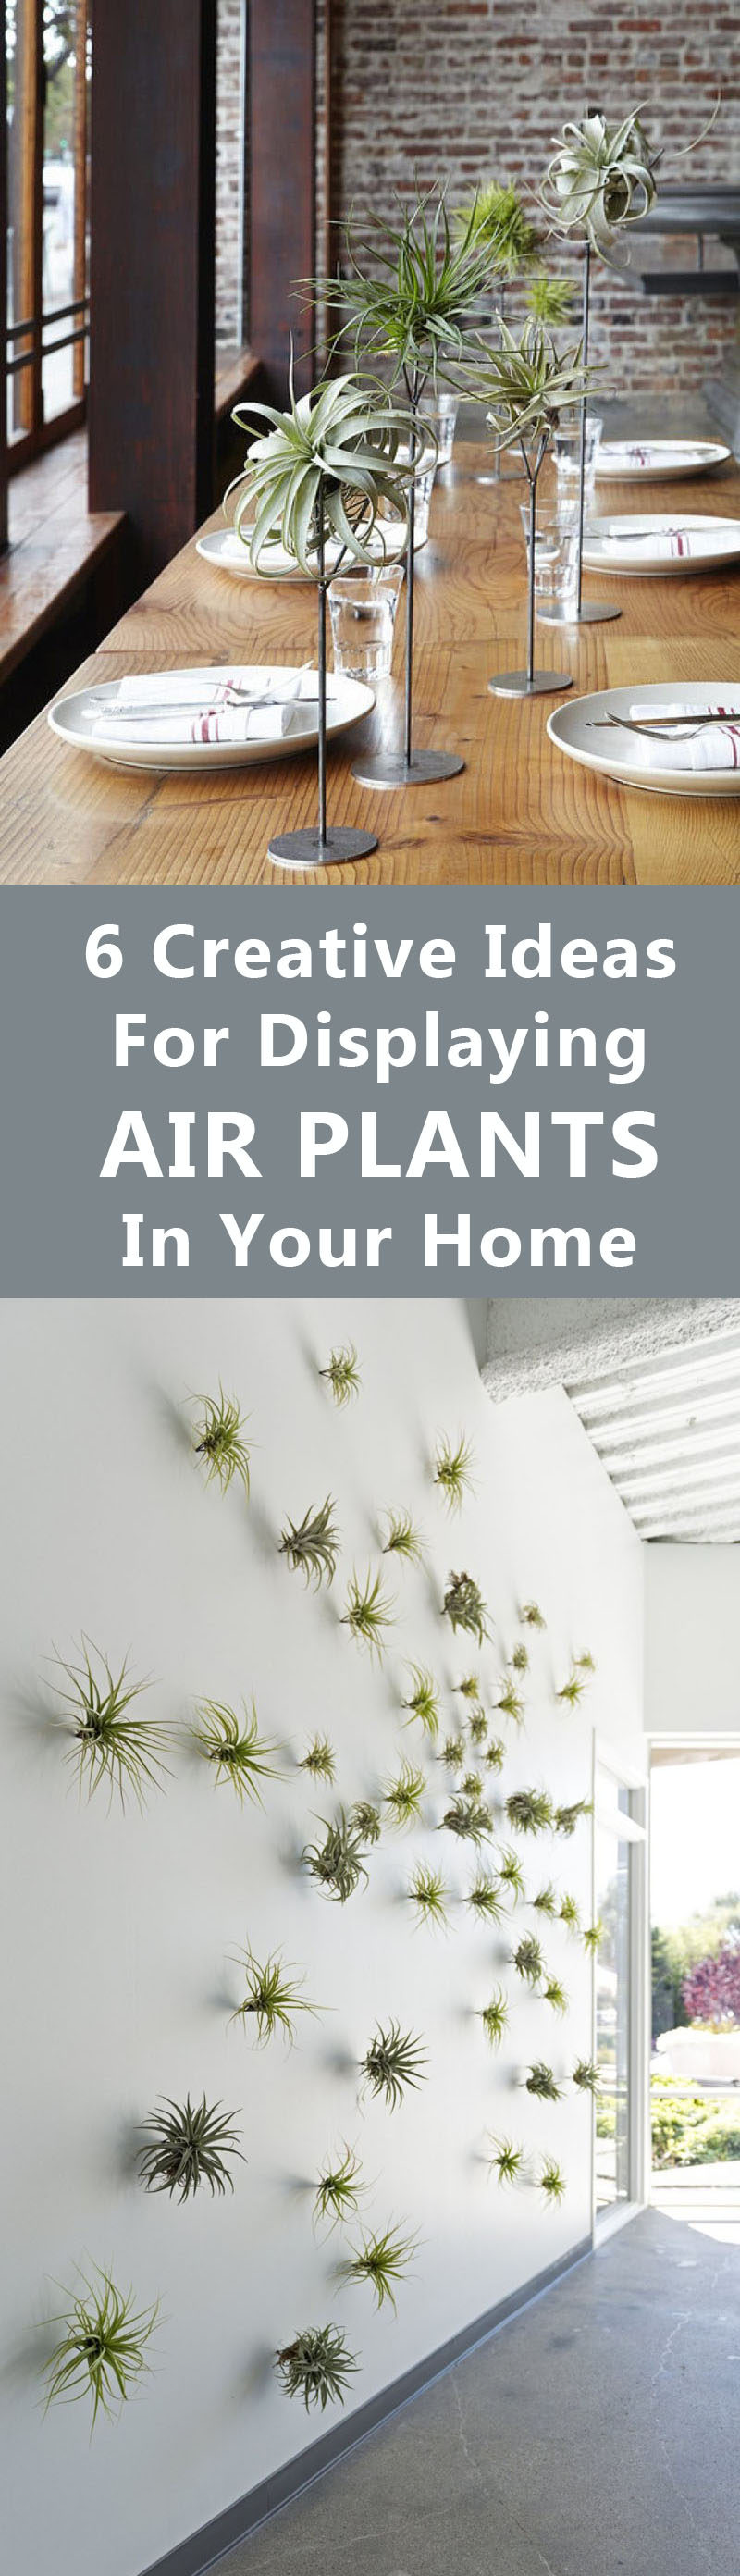 6 Creative Ideas For Displaying Air Plants In Your Home